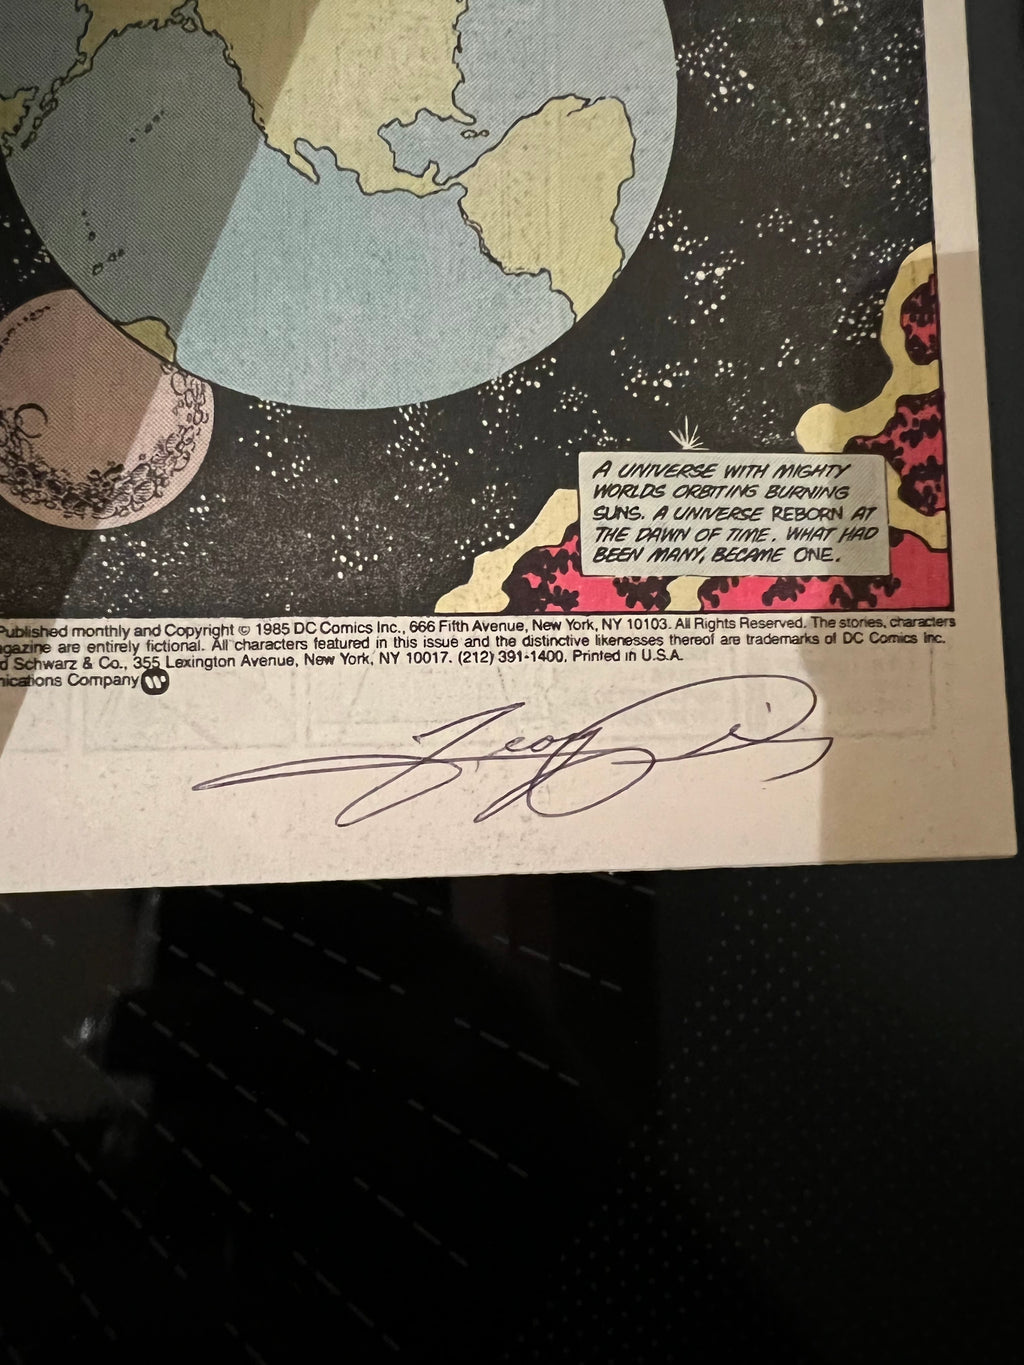 Crisis on Infinite Earths 11 NM+/M- SIGNED George Perez on 1st PG